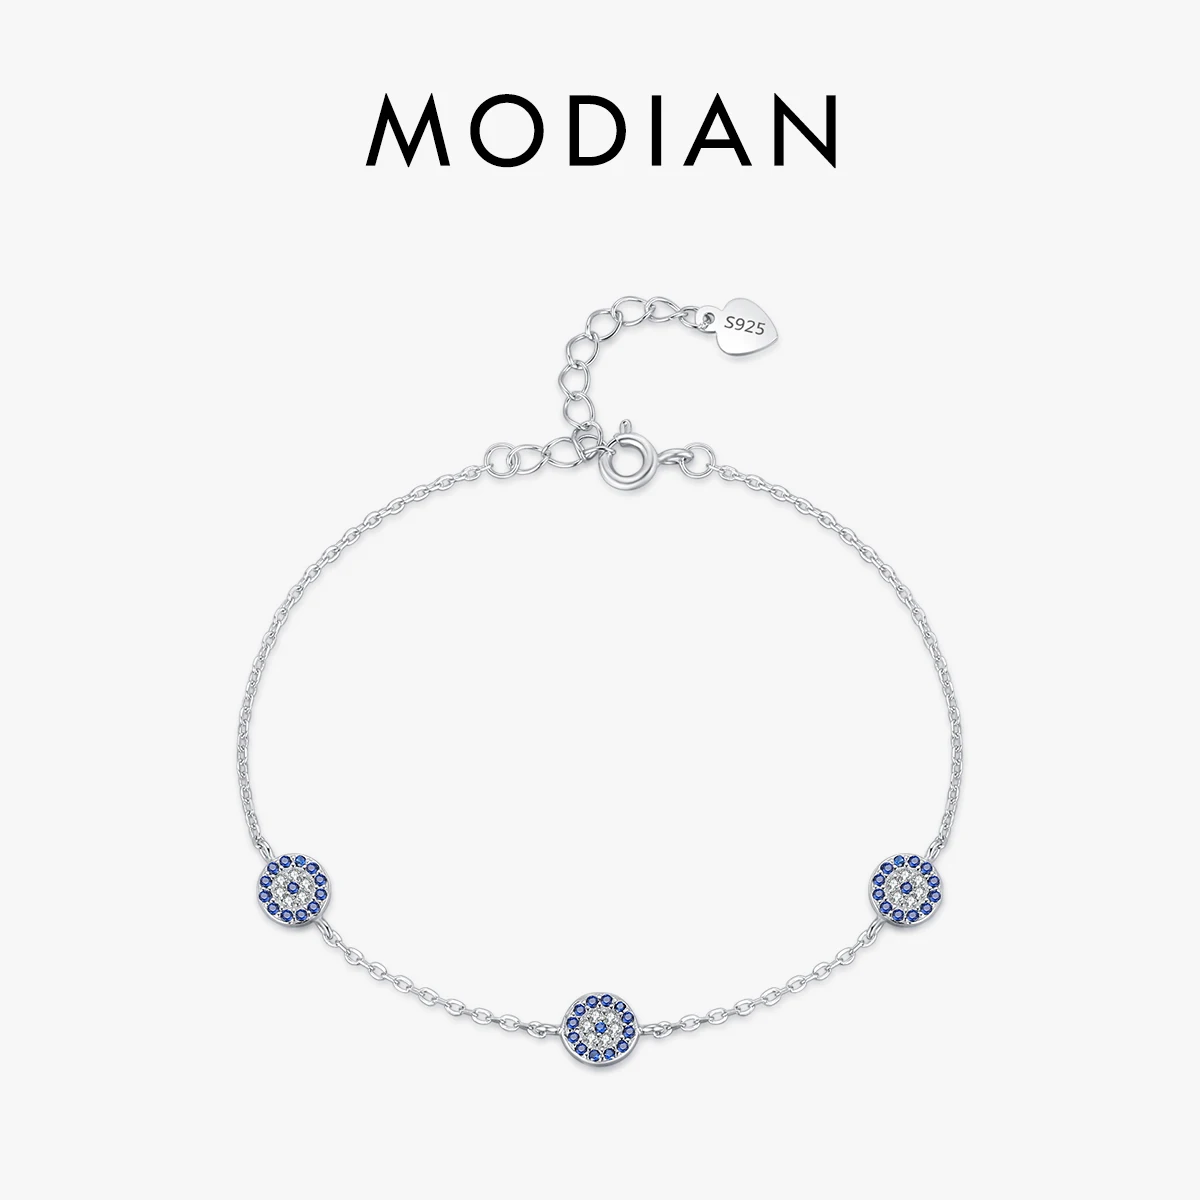 

MODIAN Authentic 925 Sterling Silver Blue Eyes Bracelet Fashion Chain Link For Women Birthday Mother‘s Day Gift Fine Jewelry